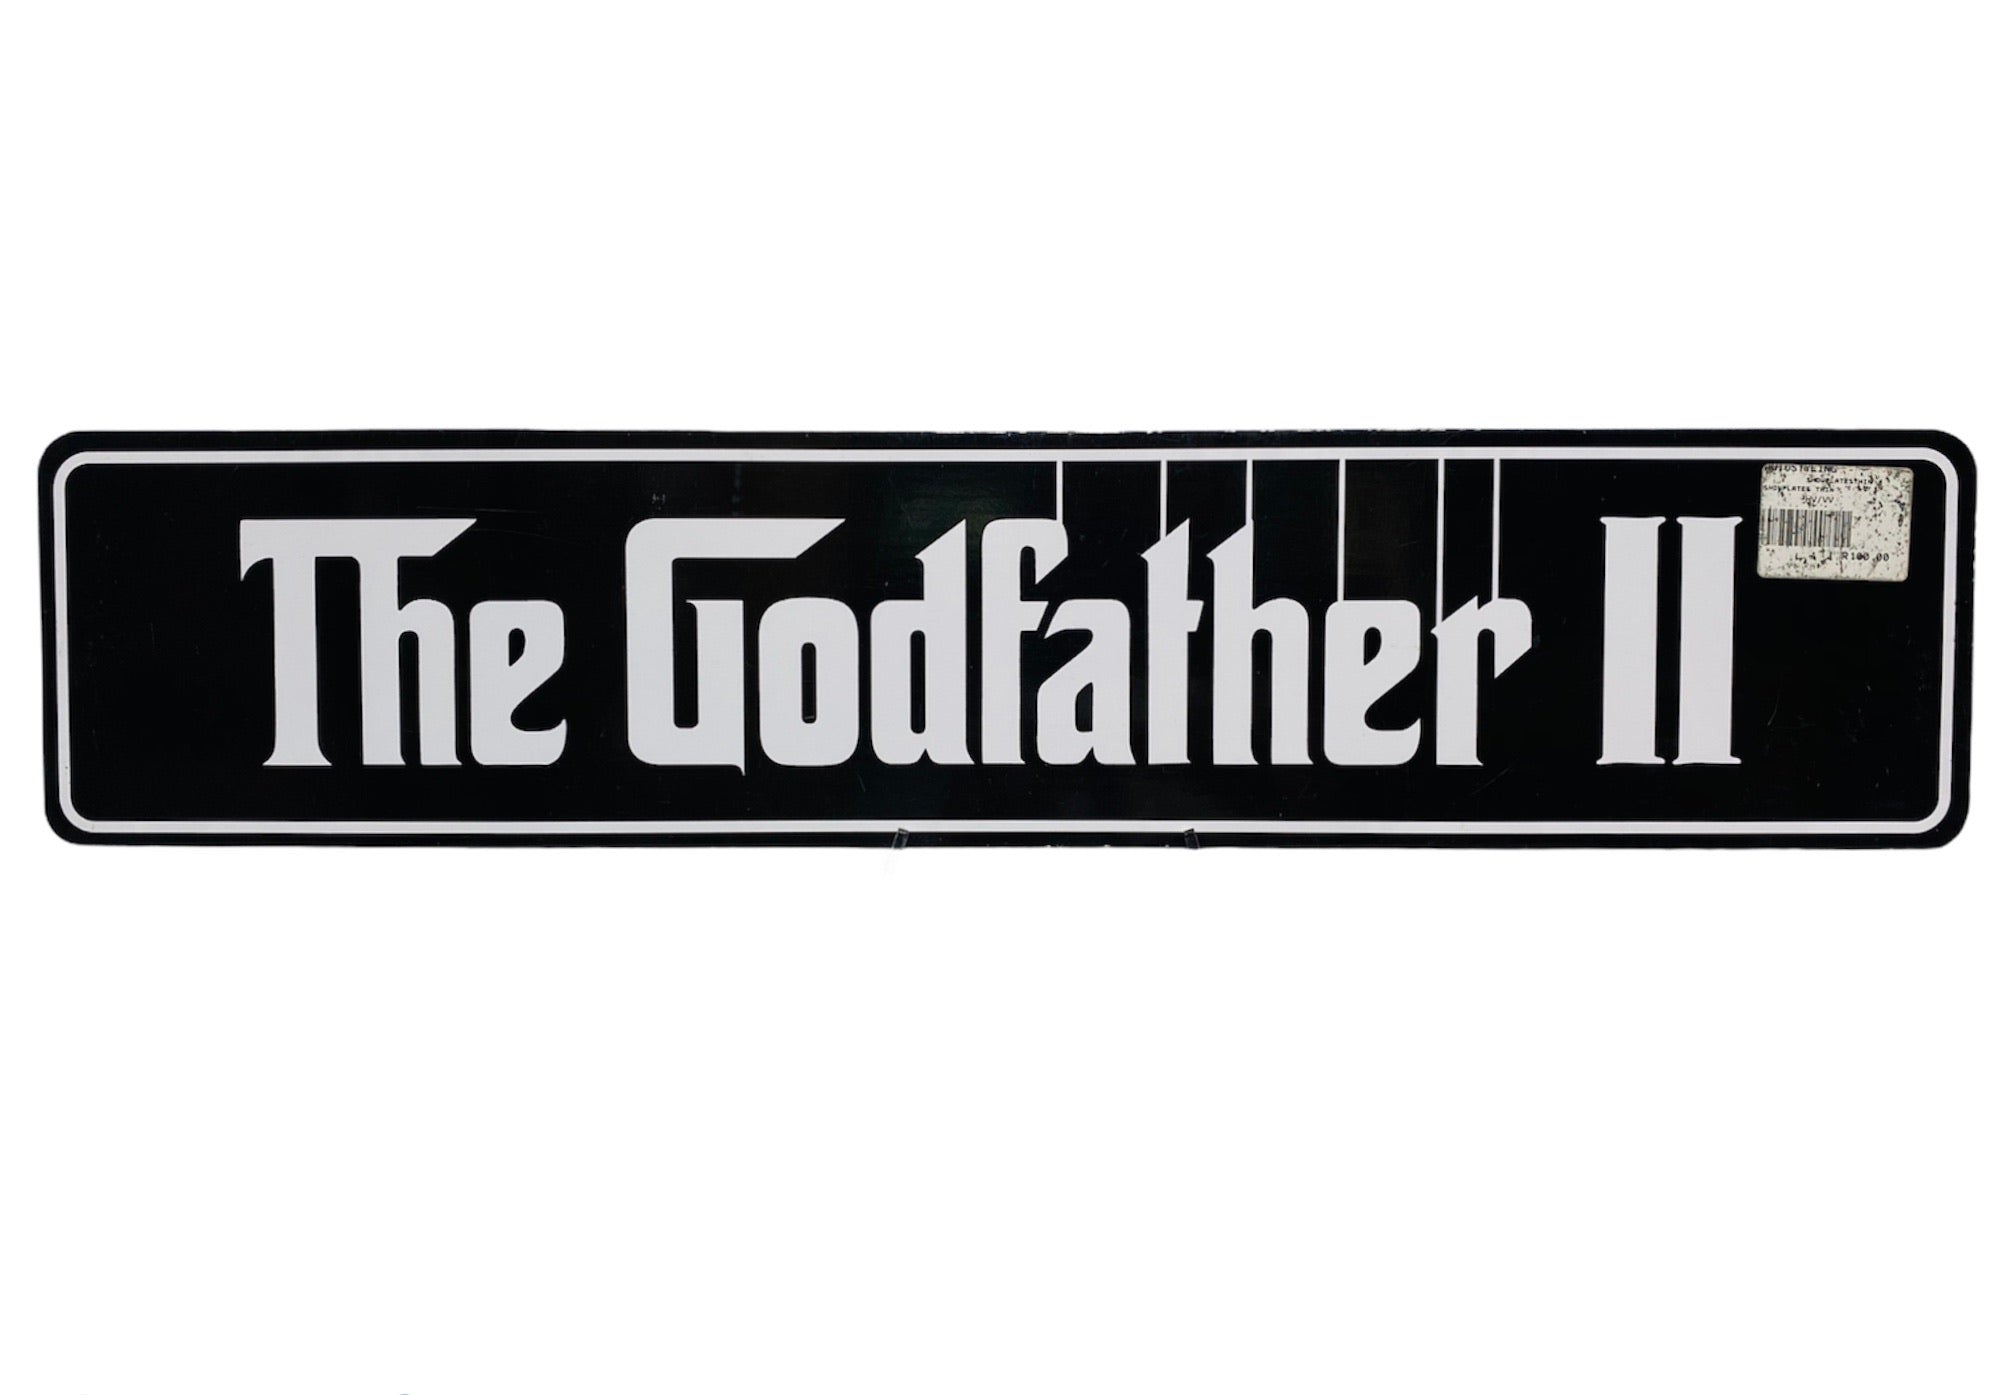 THE GODFATHER THIN SHOW PLATE